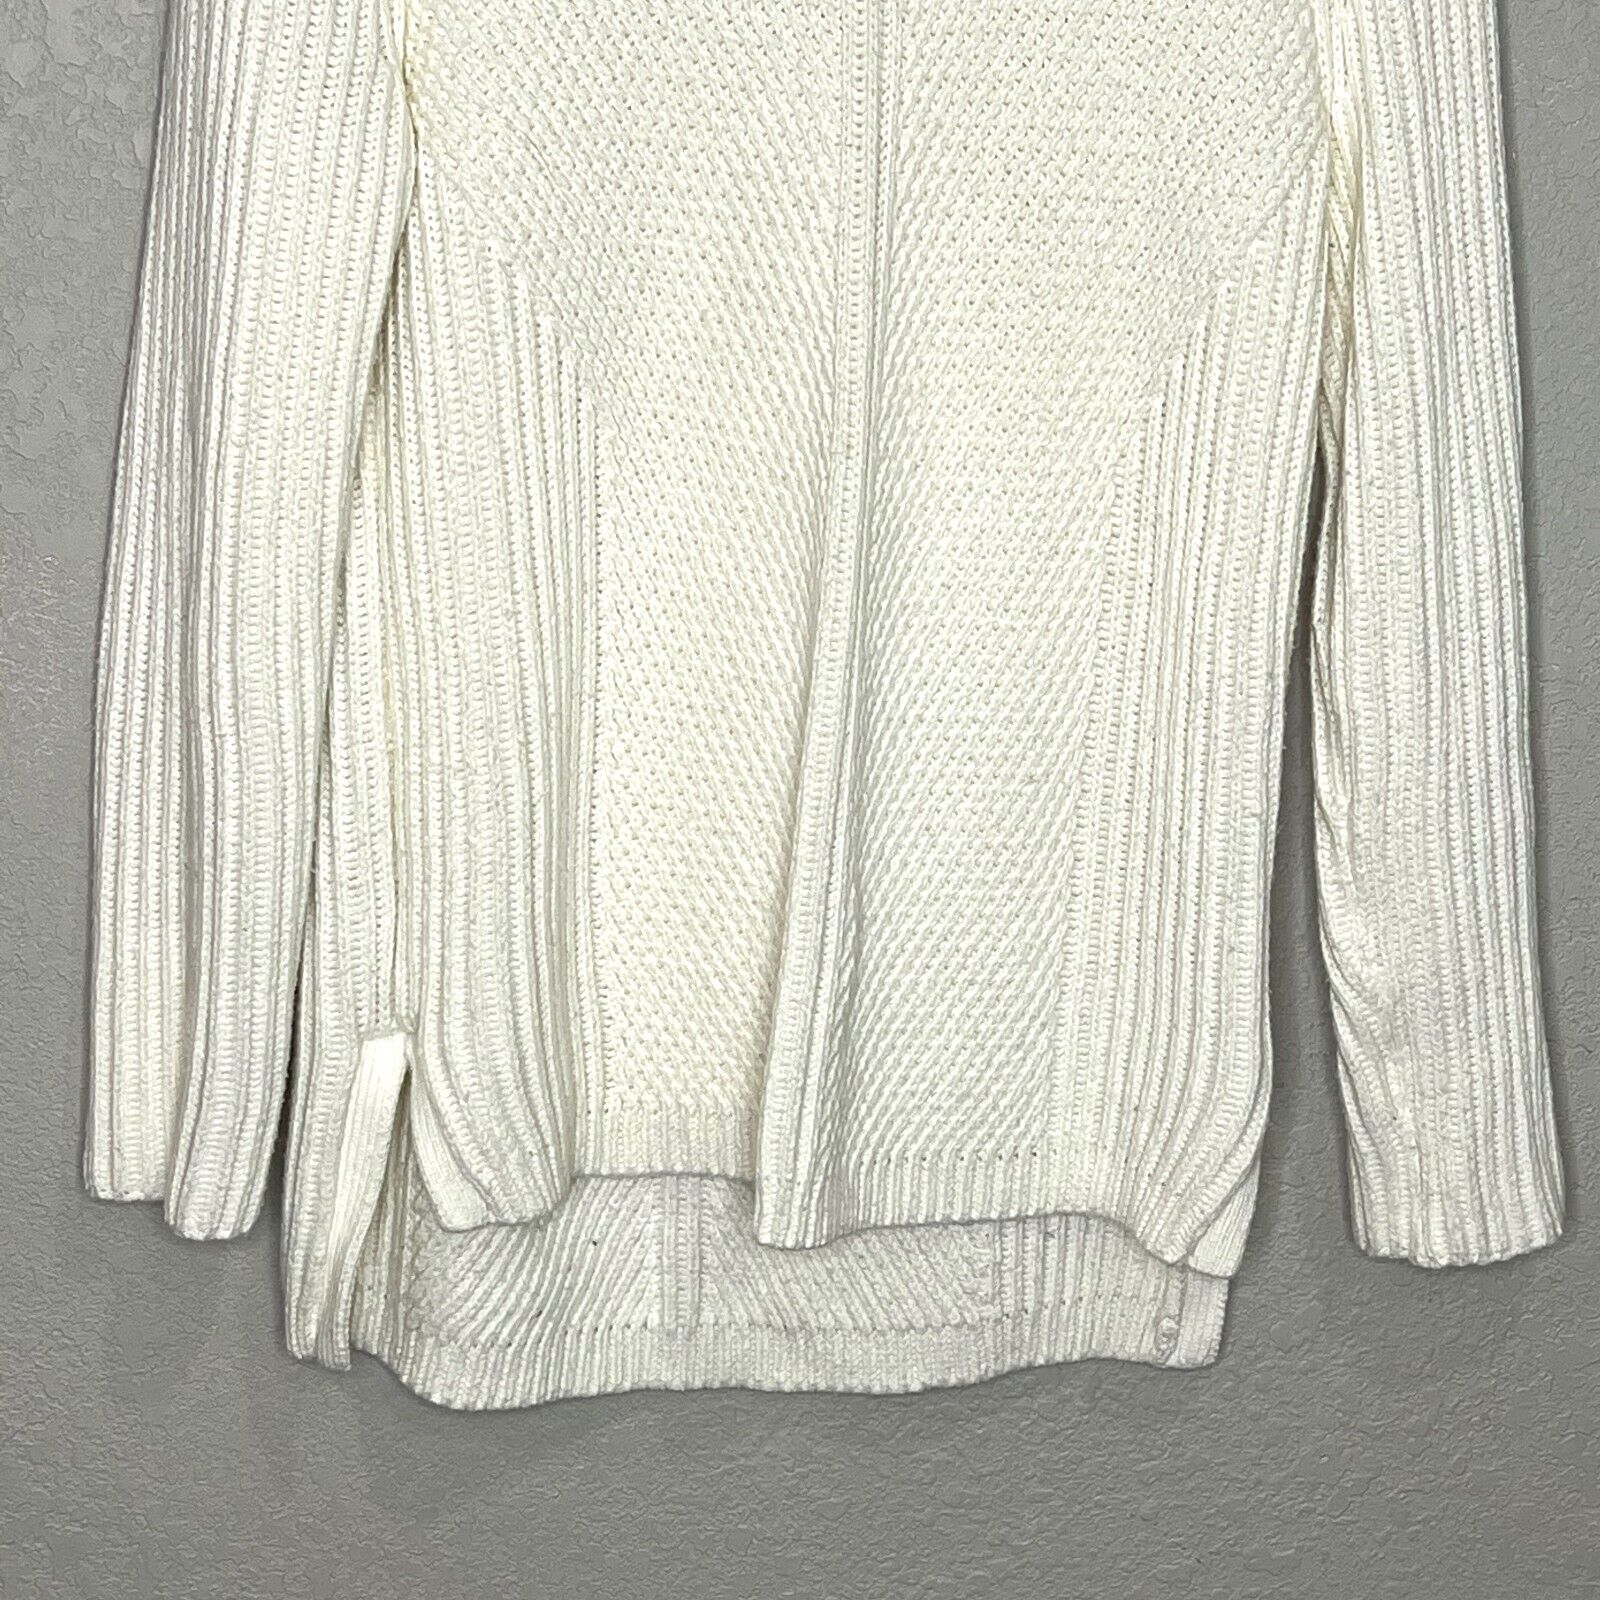 Madewell Ivory Holcomb Textured Ribbed Sweater Pullover Size Small